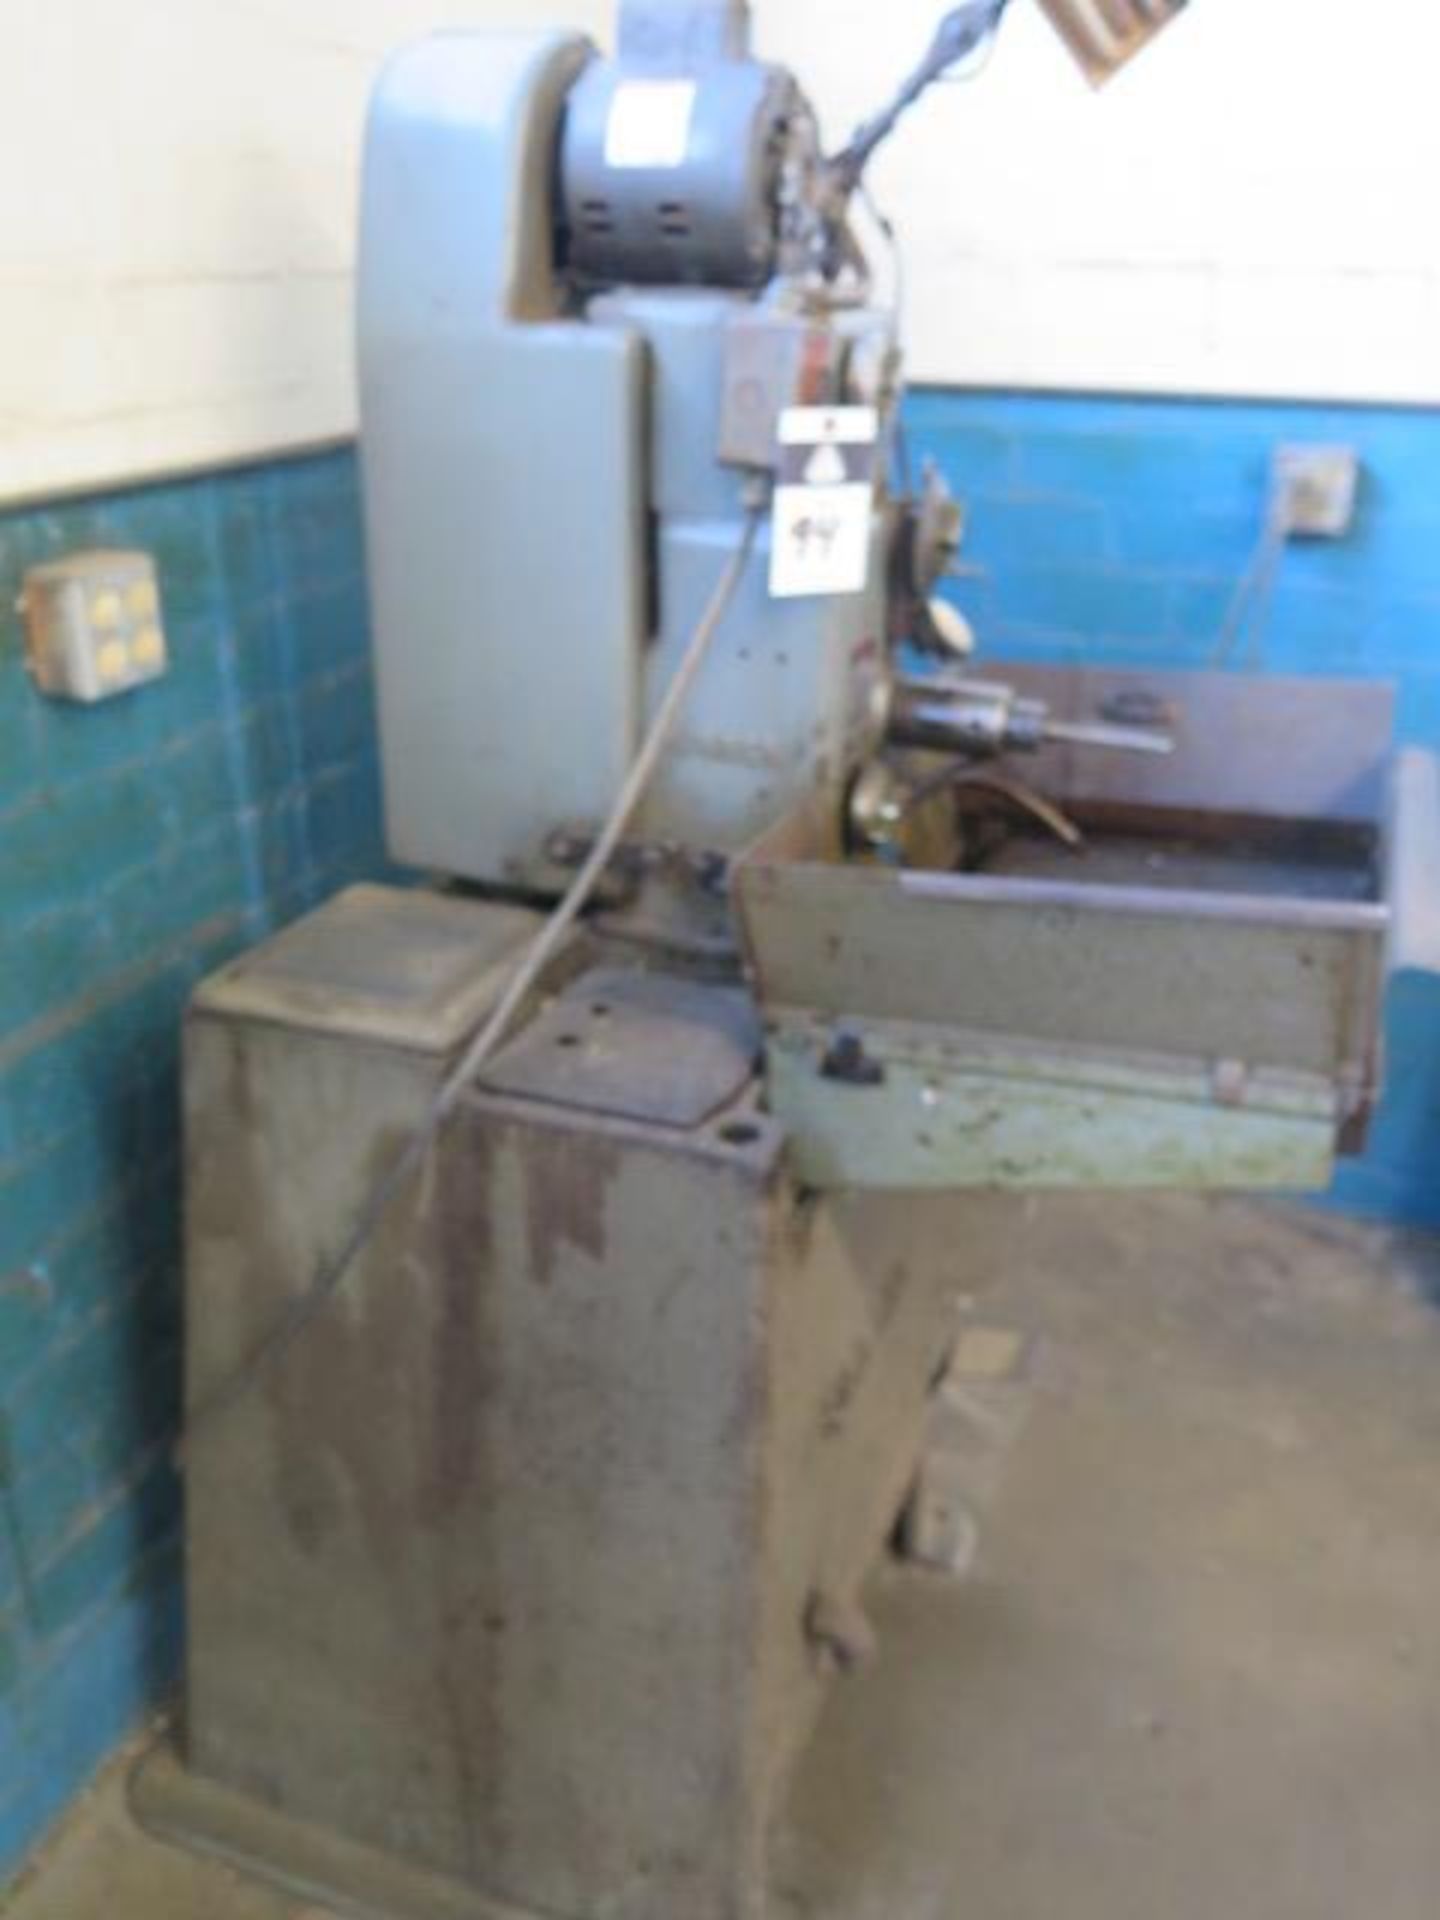 Sunnen MBB-1600 Precision Honing Machine s/n 43802 w/ Coolant (SOLD AS-IS - NO WARRANTY) - Image 7 of 8